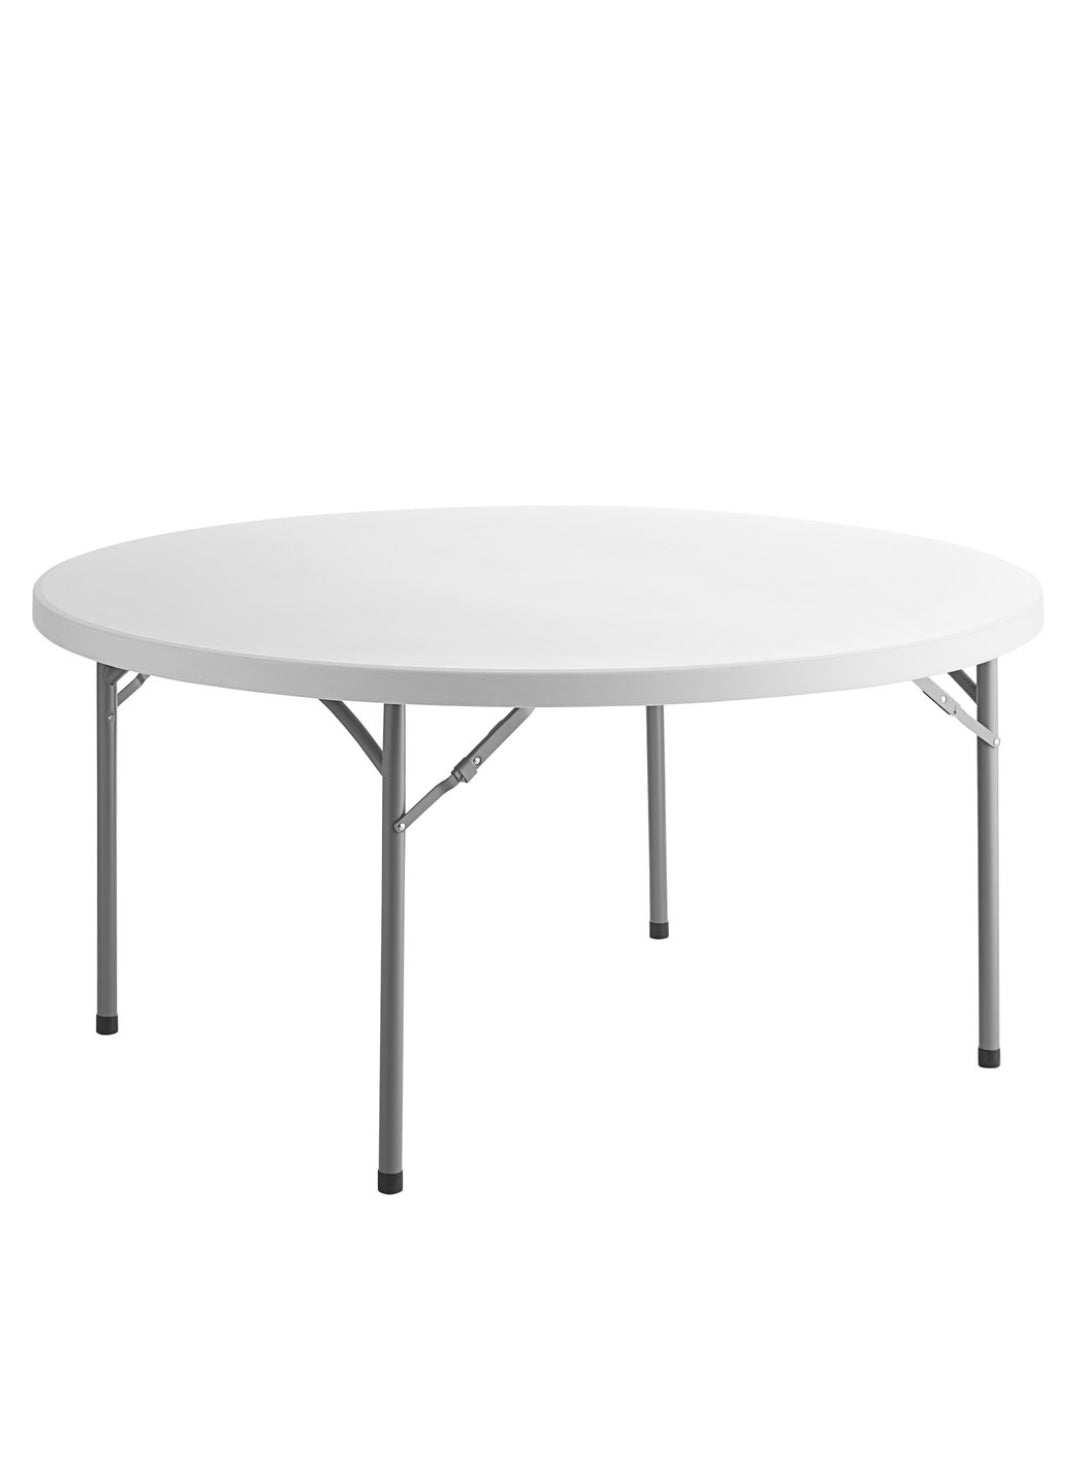 5' round tables